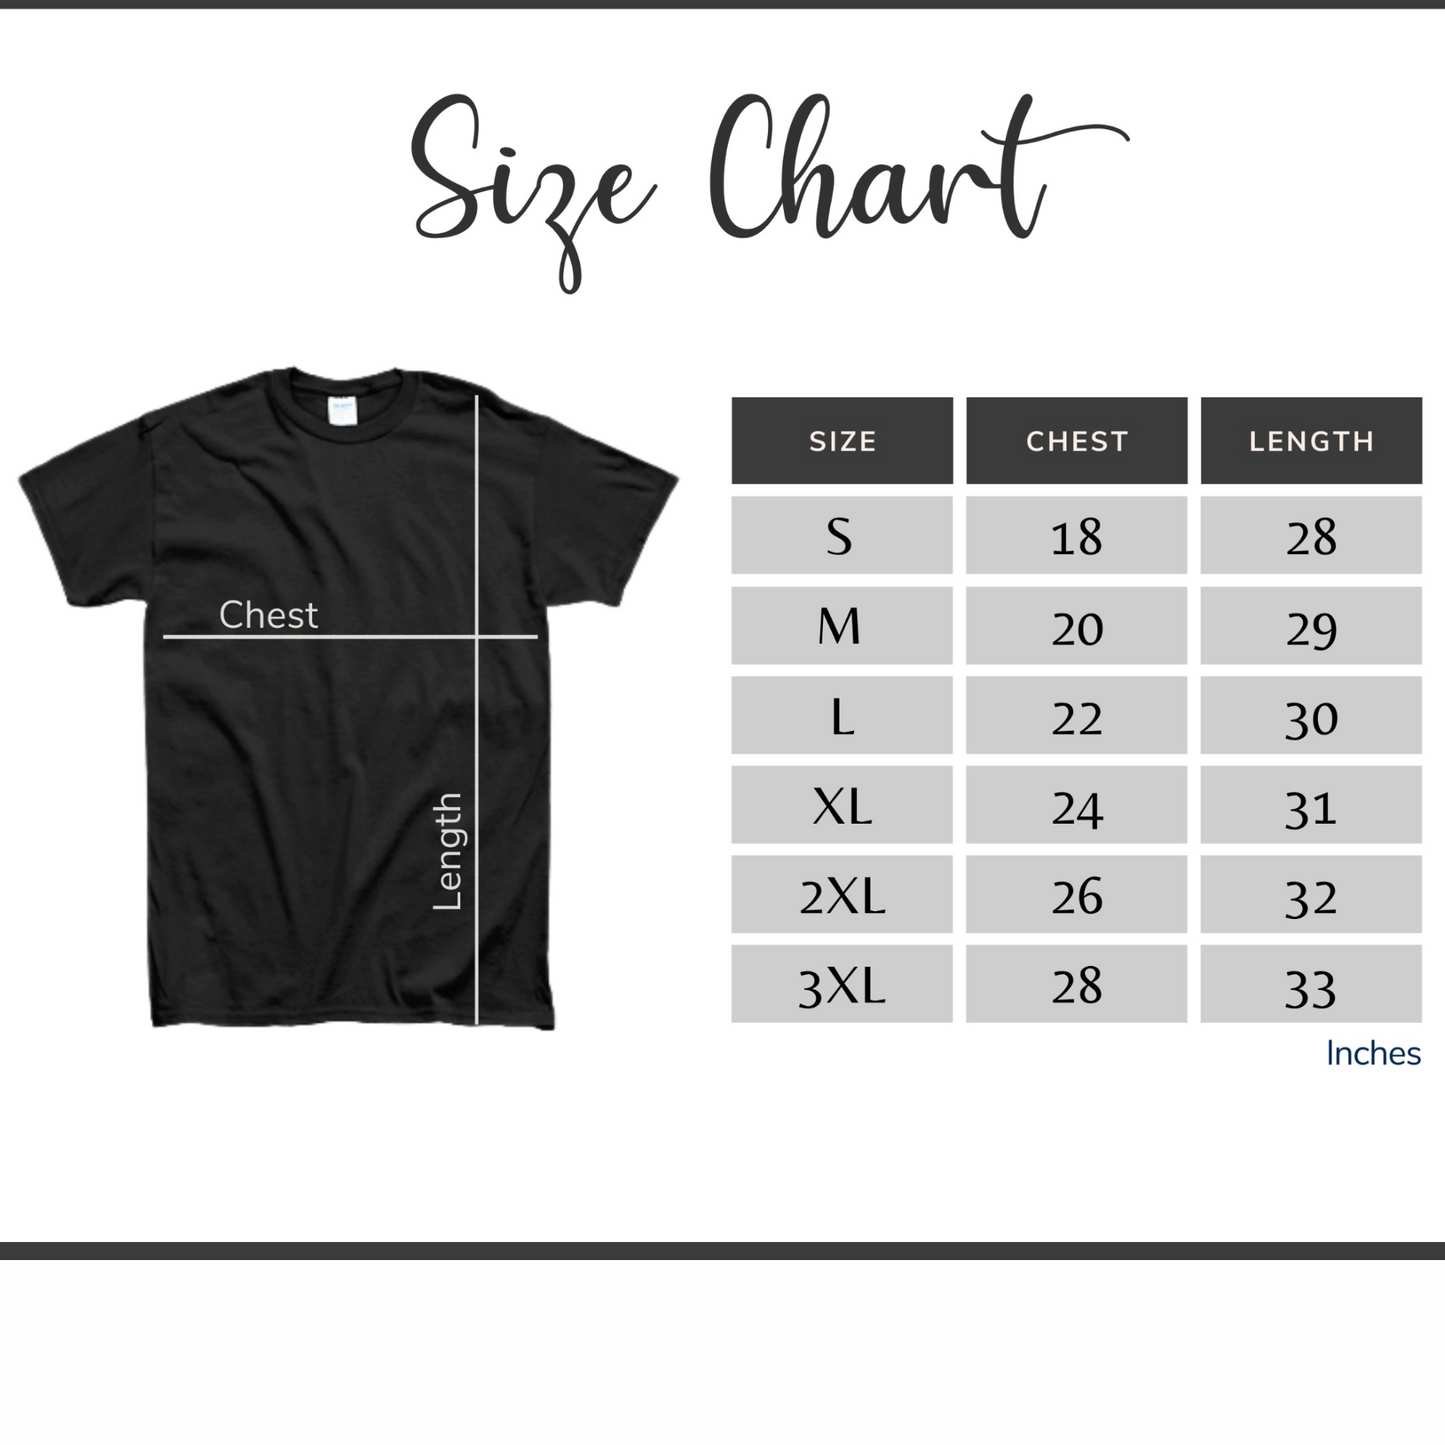 Unisex Softstyle T-Shirt-Whoop There It Is